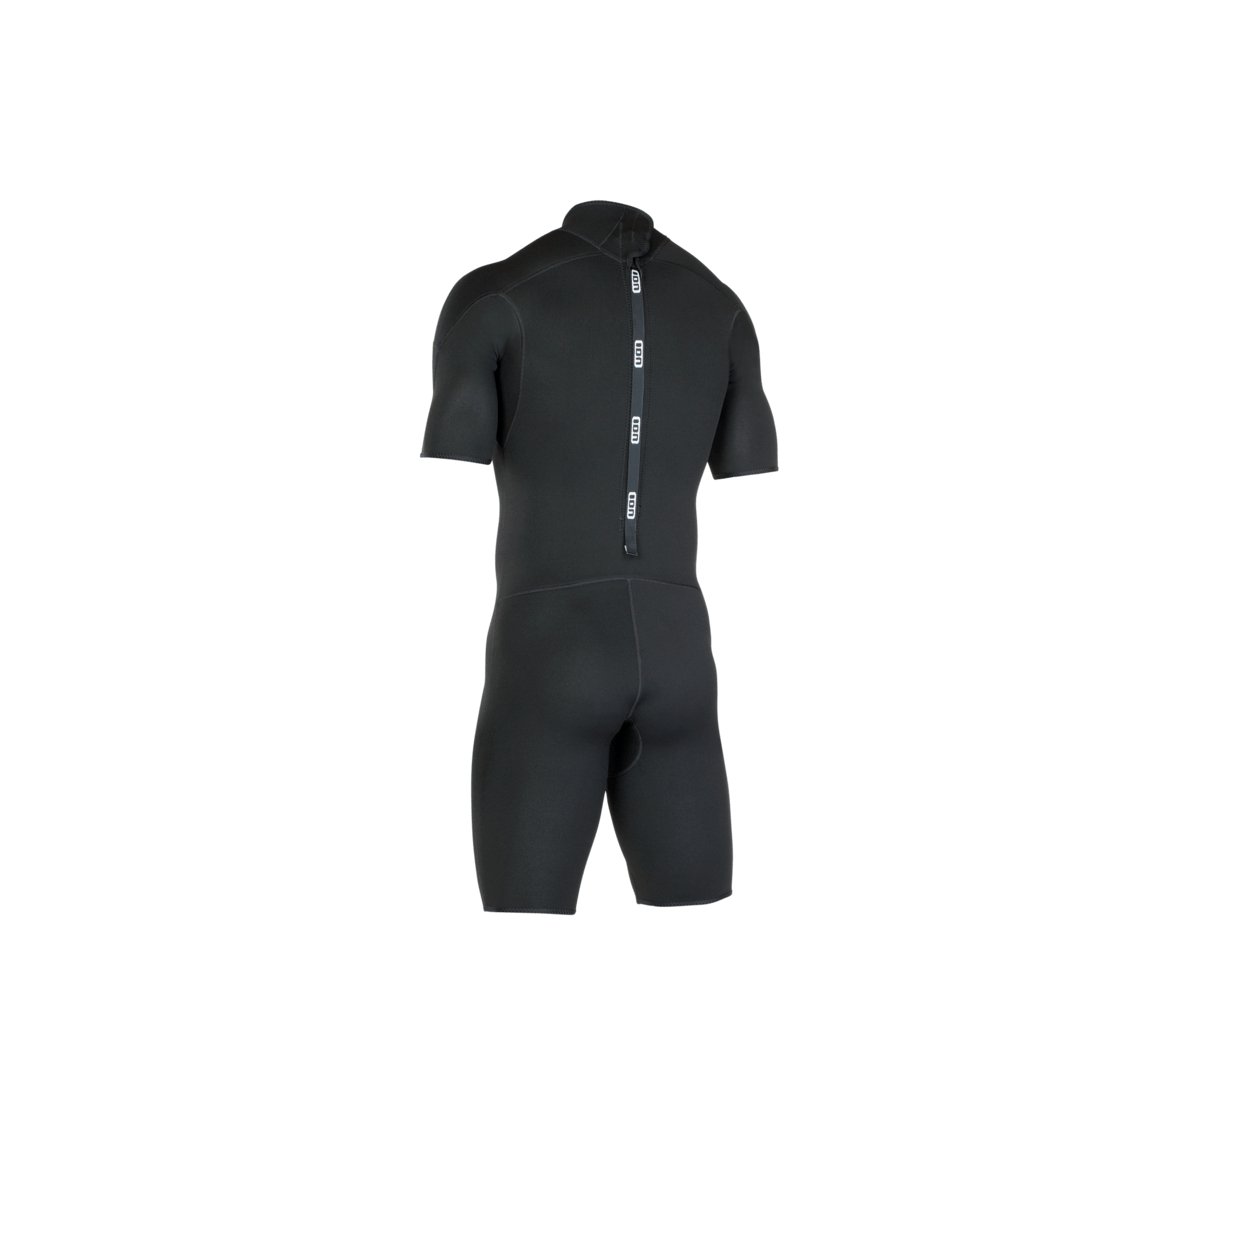 ION Base 2/2 Shorty SS Back Zip 2022 - Worthing Watersports - 9008415727896 - School & Rental - ION Water